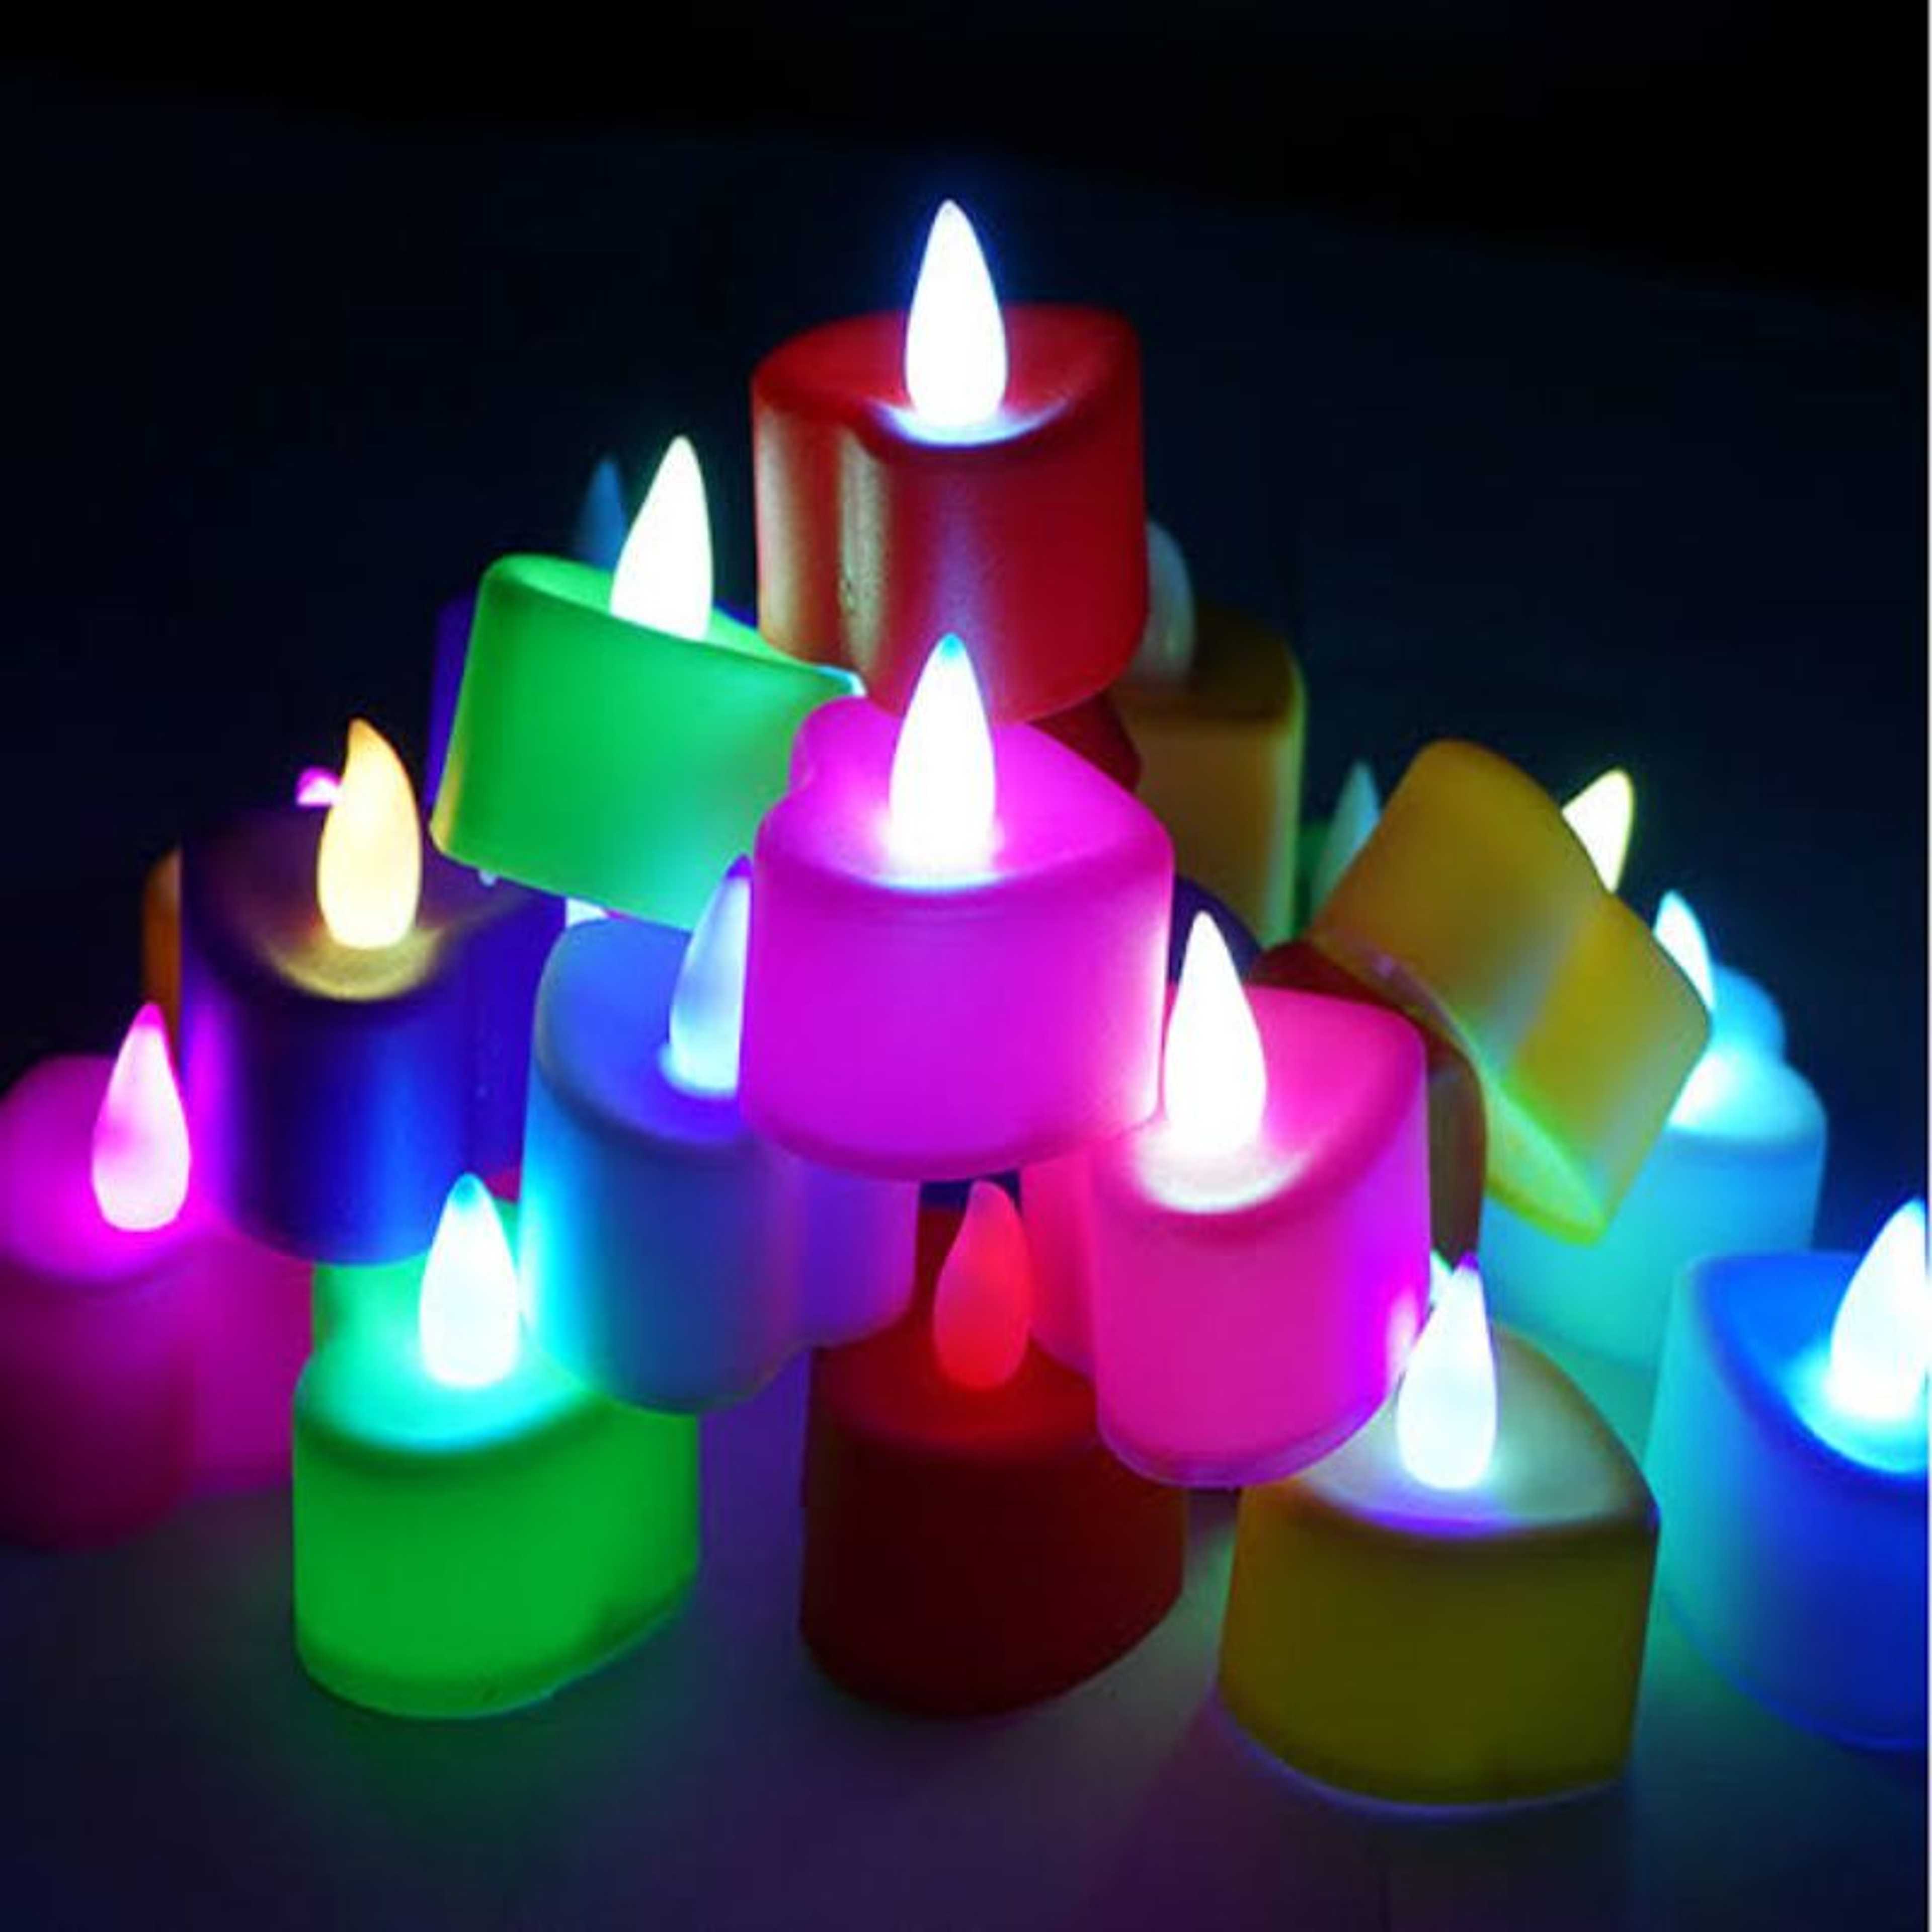 Pack of 24 - LED Heart Shaped Flameless Battery Operated Tealight Candle, Electrical Candles Candle for Home Decorations Wedding Birthday Party Celebrations